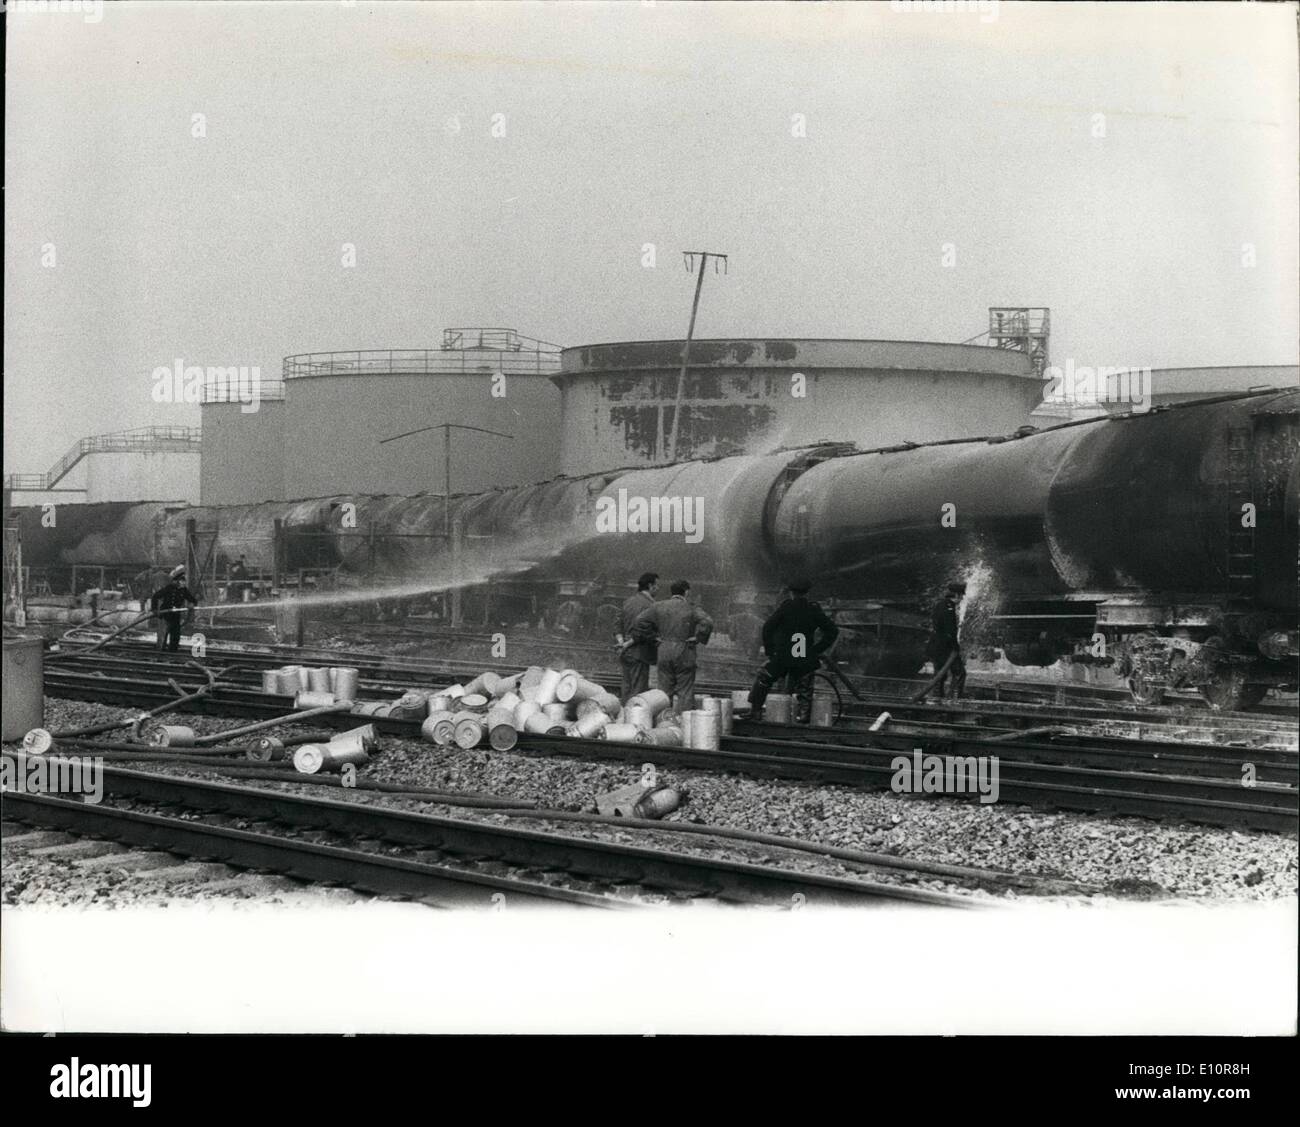 Oct. 10, 1973 - Langley Oil Depot Blaze. From about 5 O'Clock night until about 2 A.M. this morning 680 tons of high grade petrol and 370 tons of diesel fuel in 13 rail tankers blazed away. At the height of the blaze flames threatened to spread and ignite more than a million tons of fuel in six giant storage tanks. This massive all night fuel fire was at the small town of Langley, Bucks, In the total Oil Company's biggest fuel depot in Britain and supplies Heathrow Airport and all Southern England with petrol and Oils Stock Photo